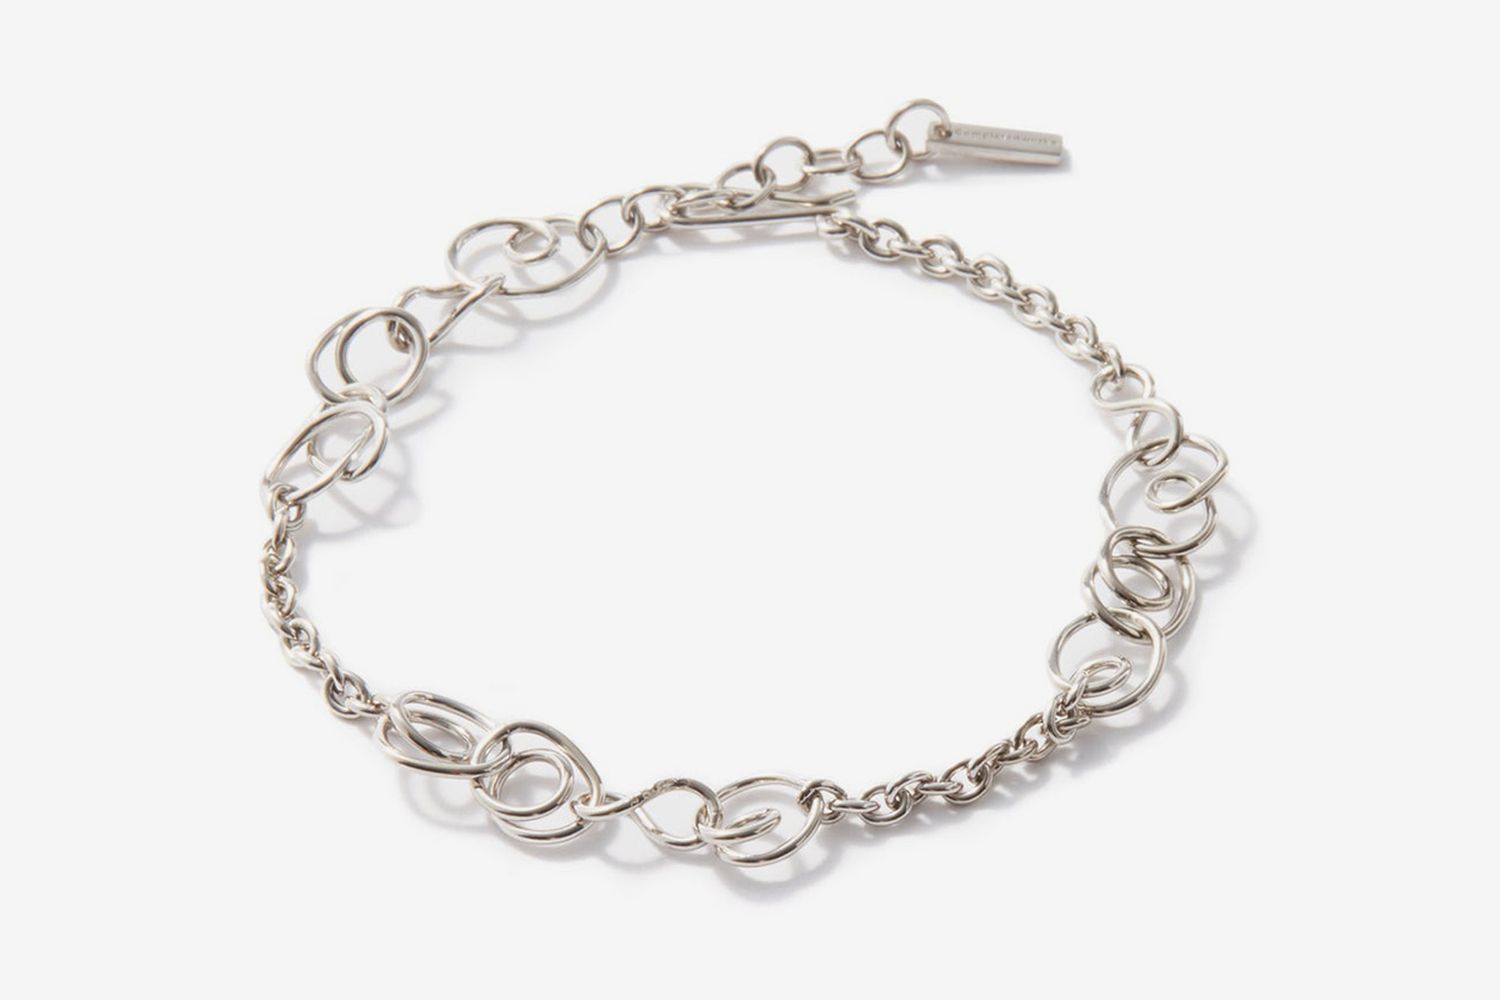 Platinum-Plated Recycled Sterling-Silver Bracelet